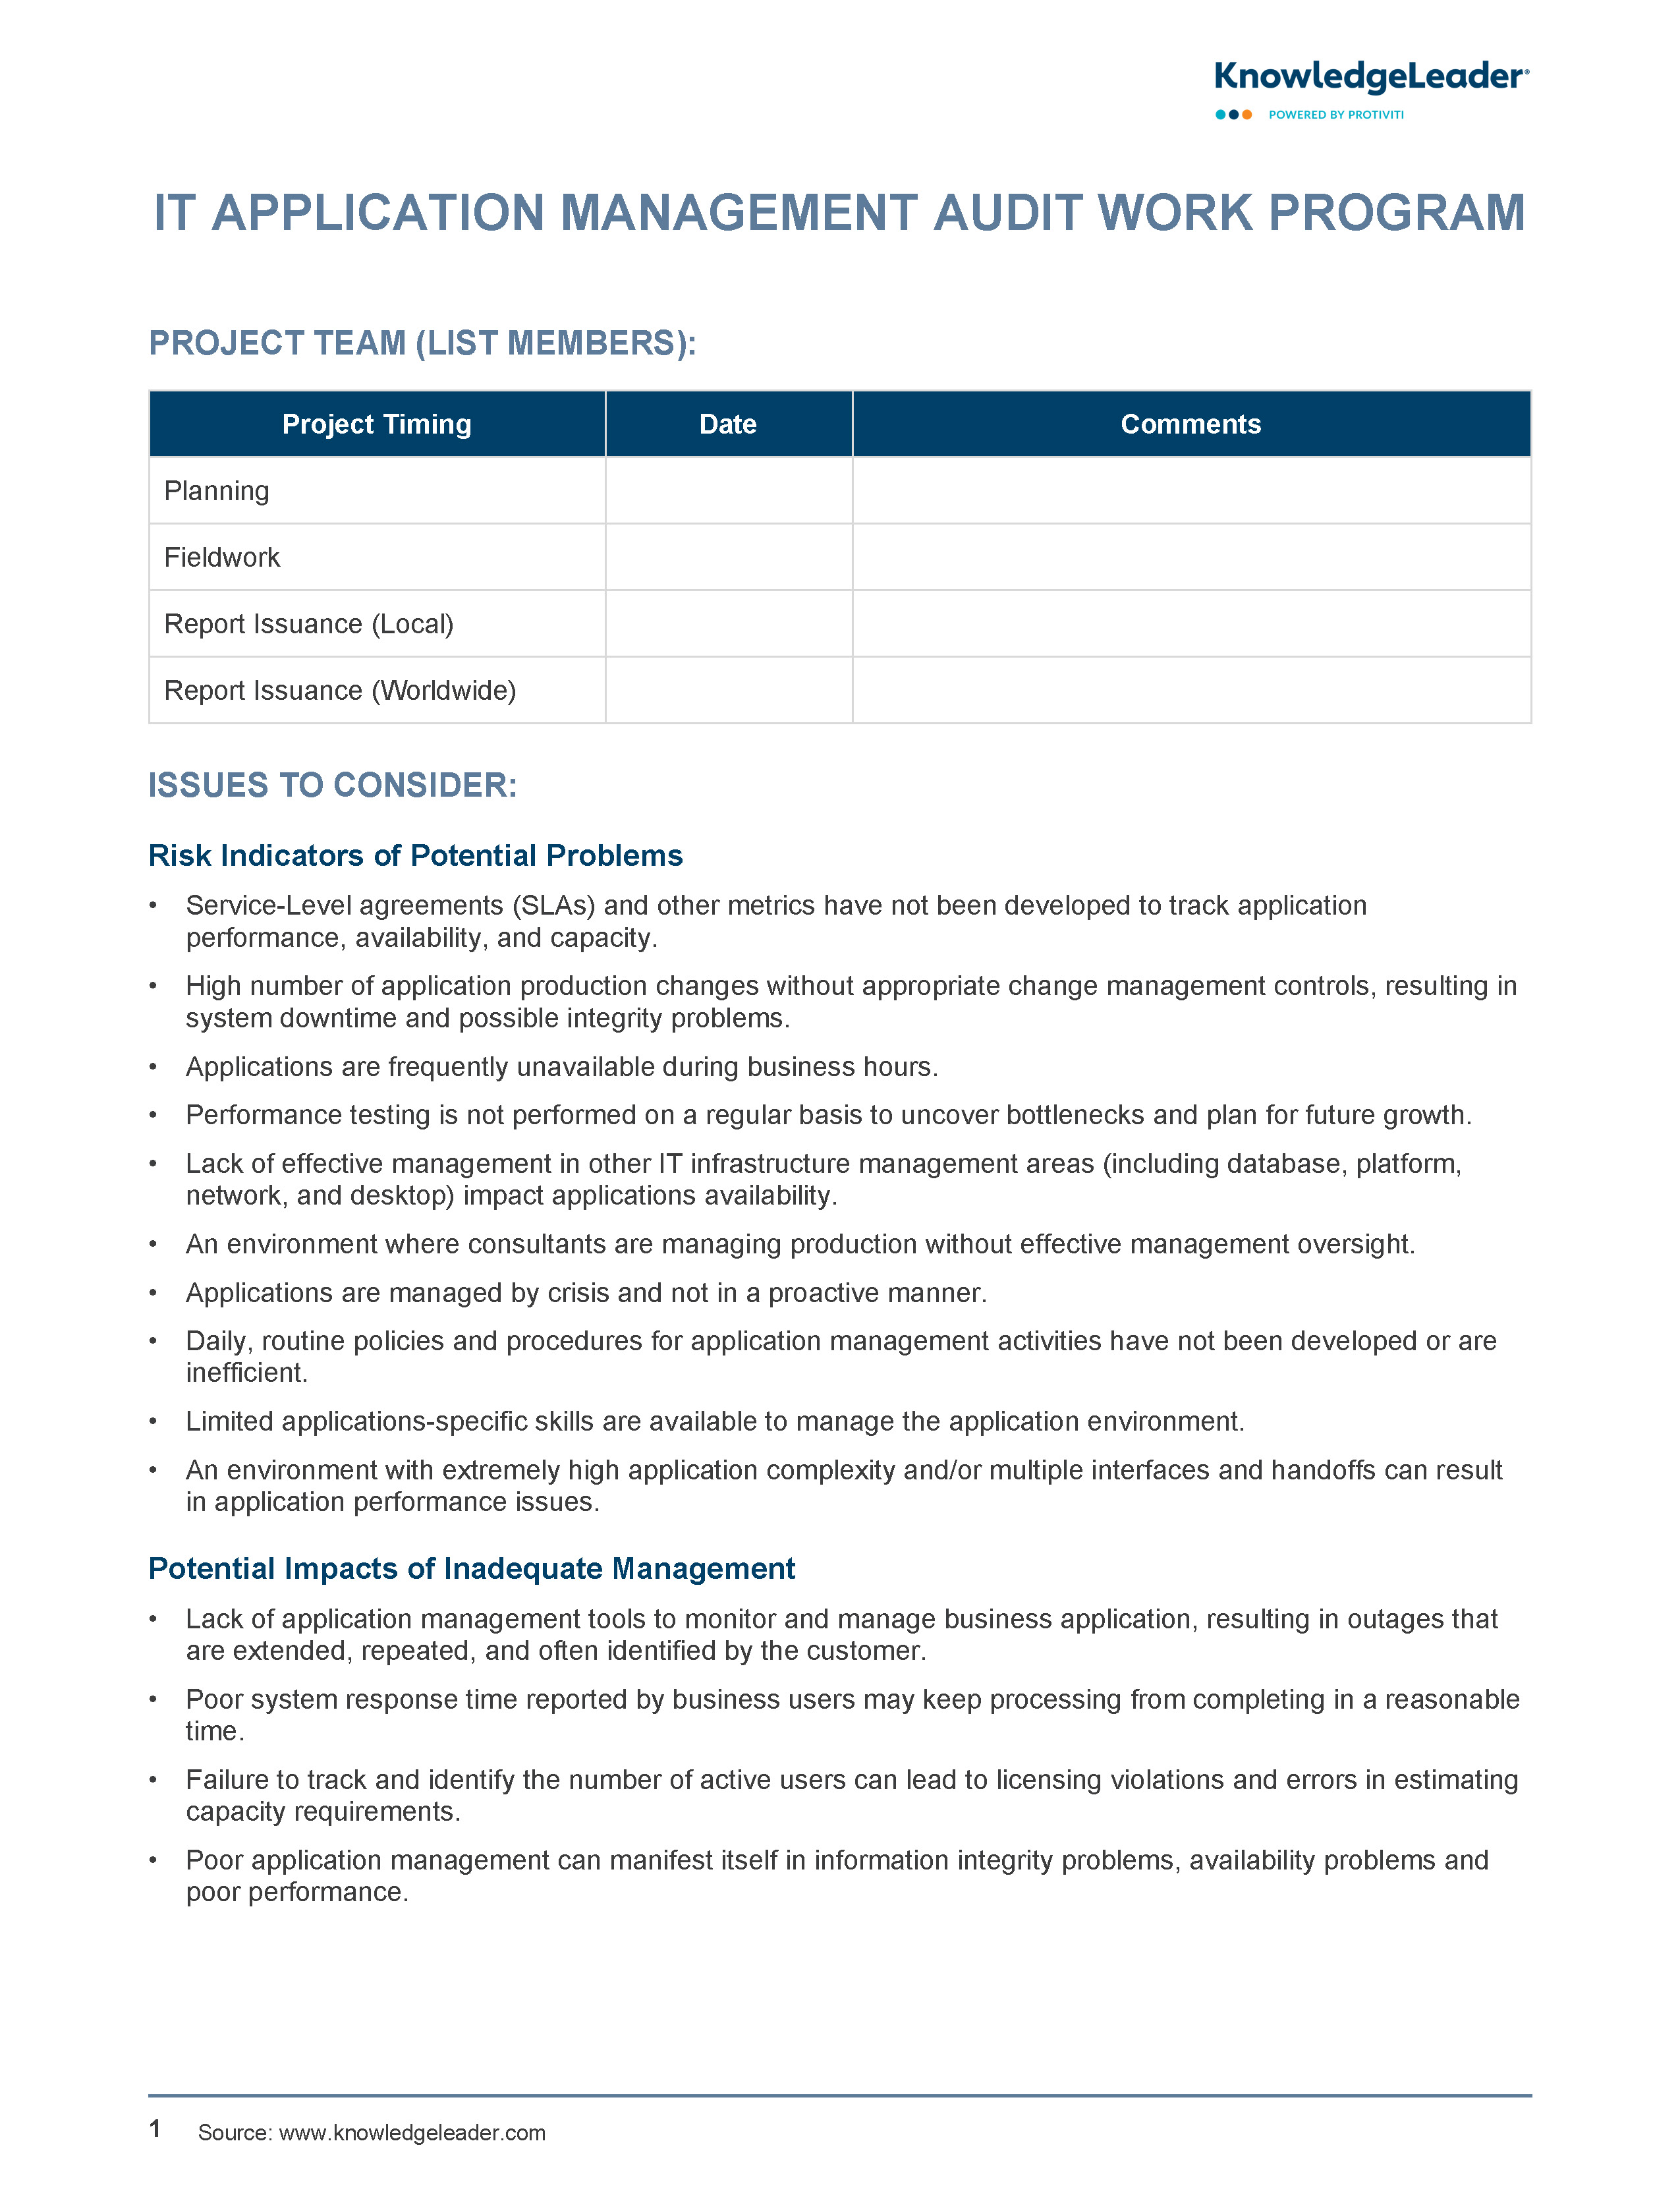 Screenshot of the first page of IT Application Management Audit Work Program